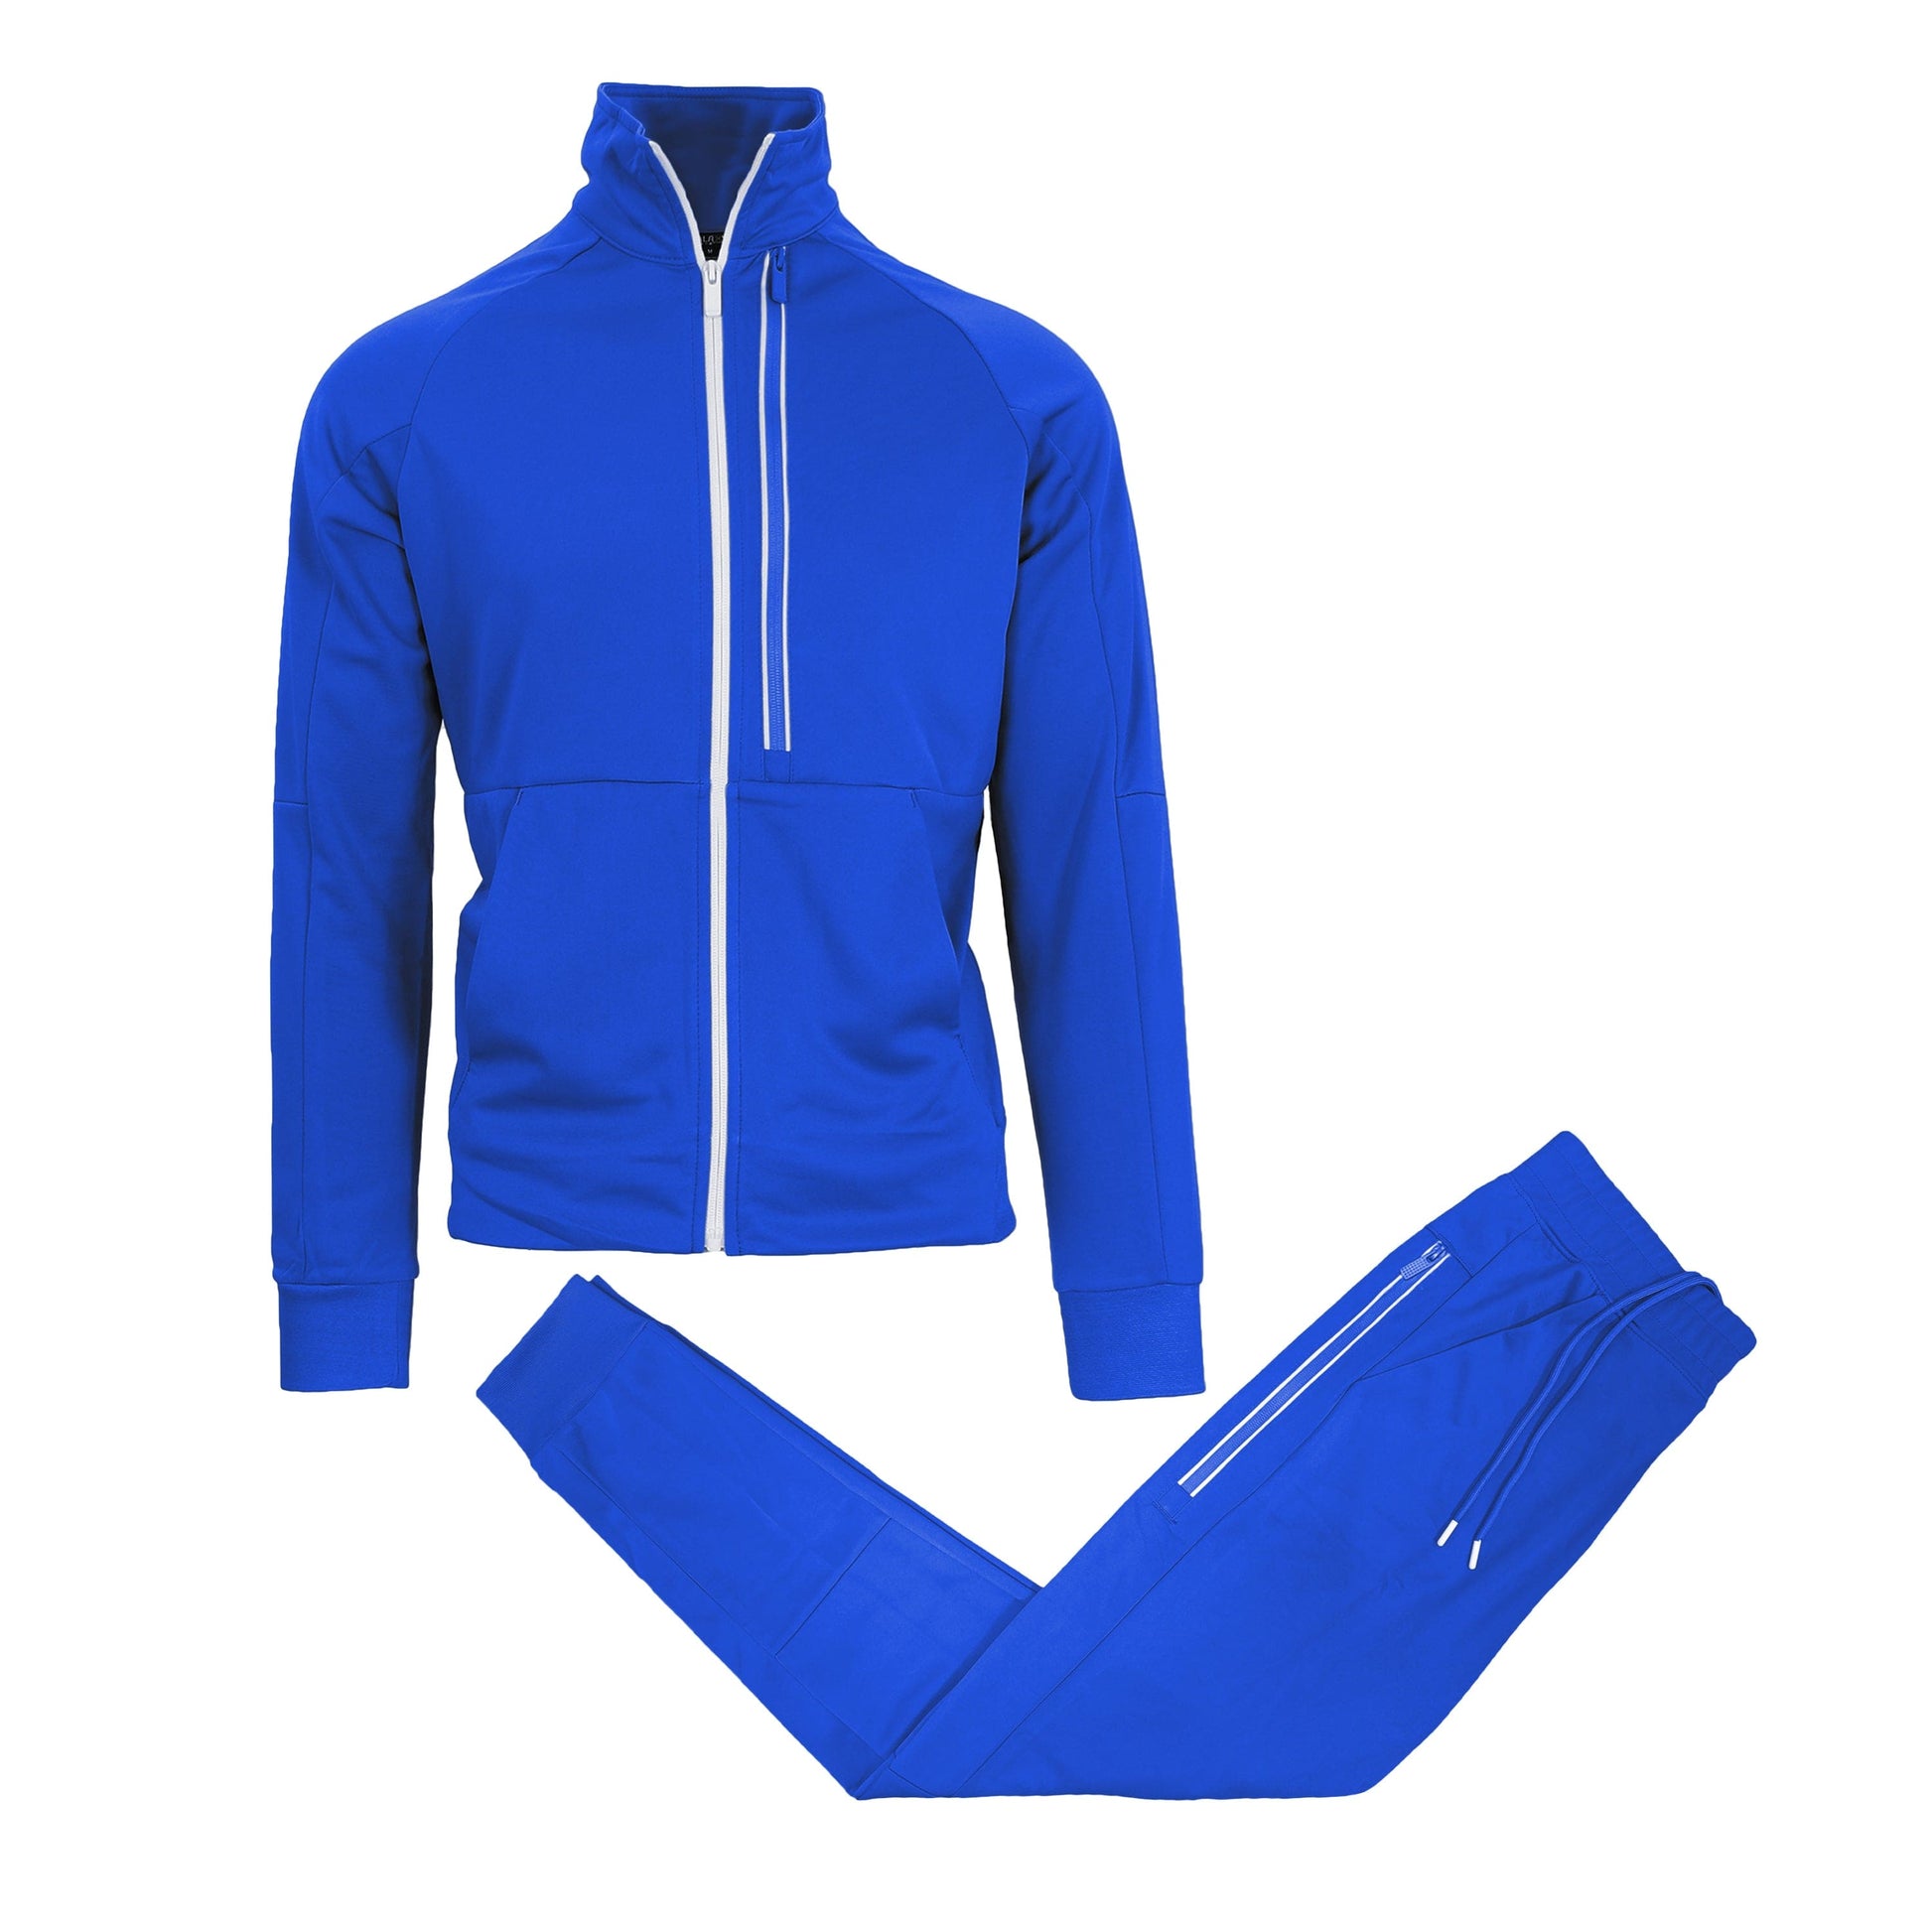 Men's Navy Blue Solid polyester Activewear Jackets